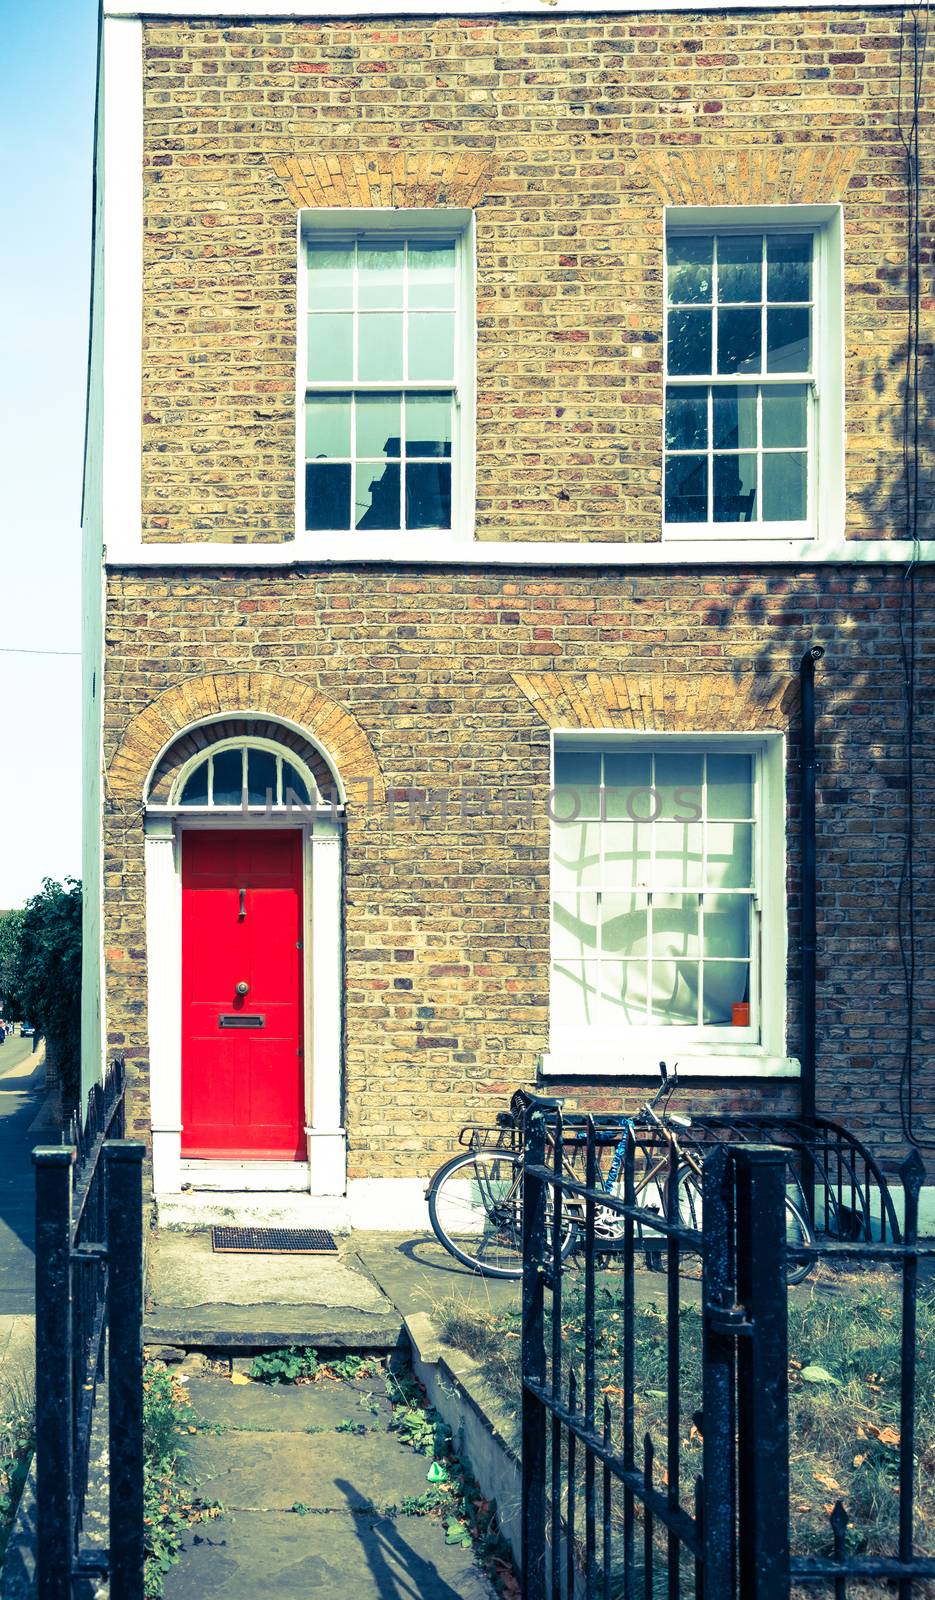 Vintage effect East London terrace home with red door. by brians101